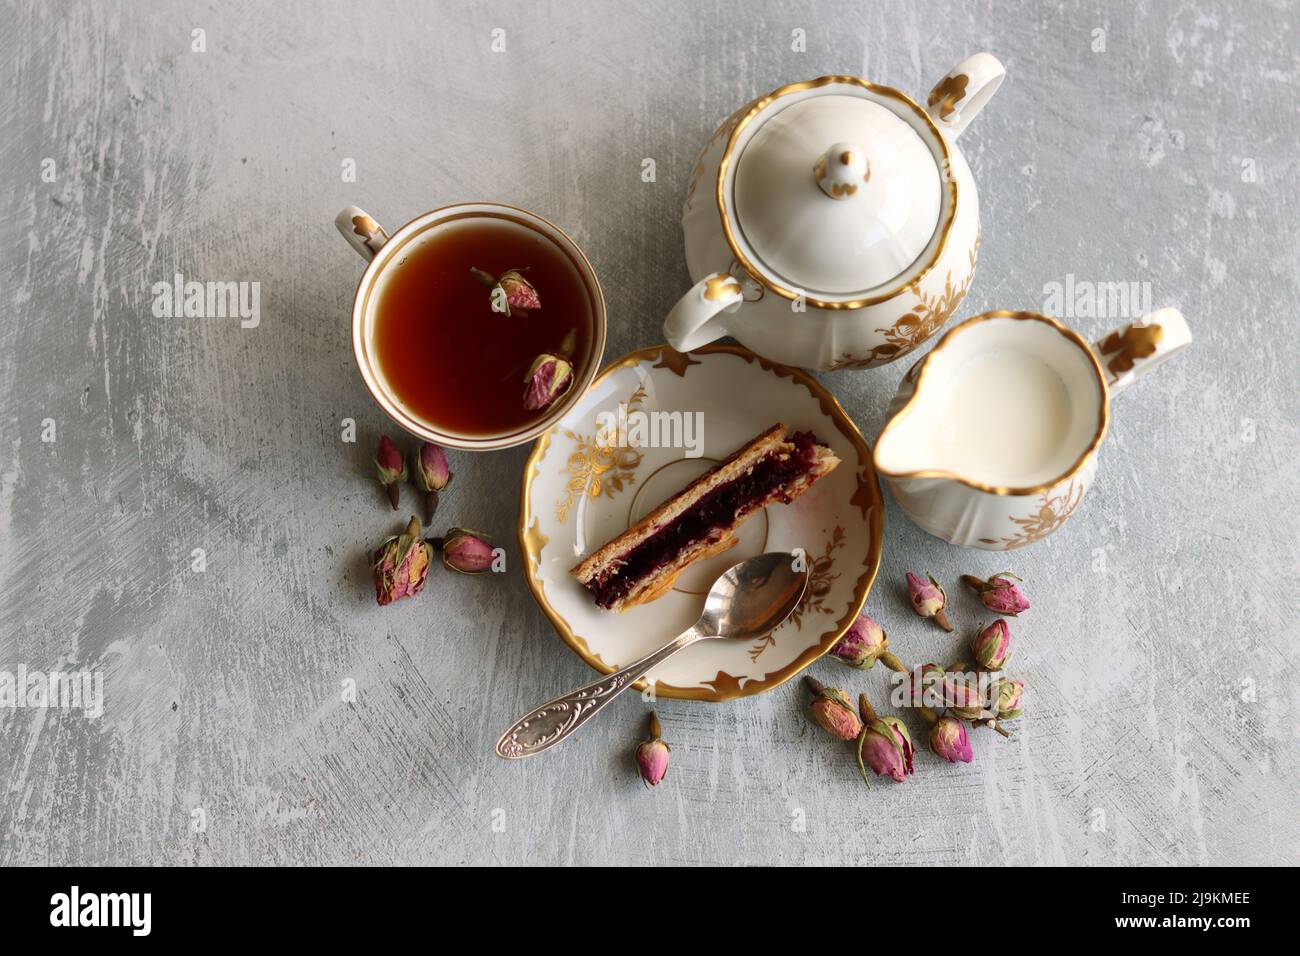 Still life with cup of tea,  jug of milk, cherry pie, small rose flowers. White vintage tableware on a table.  Sweet breakfast close up photo. Stock Photo